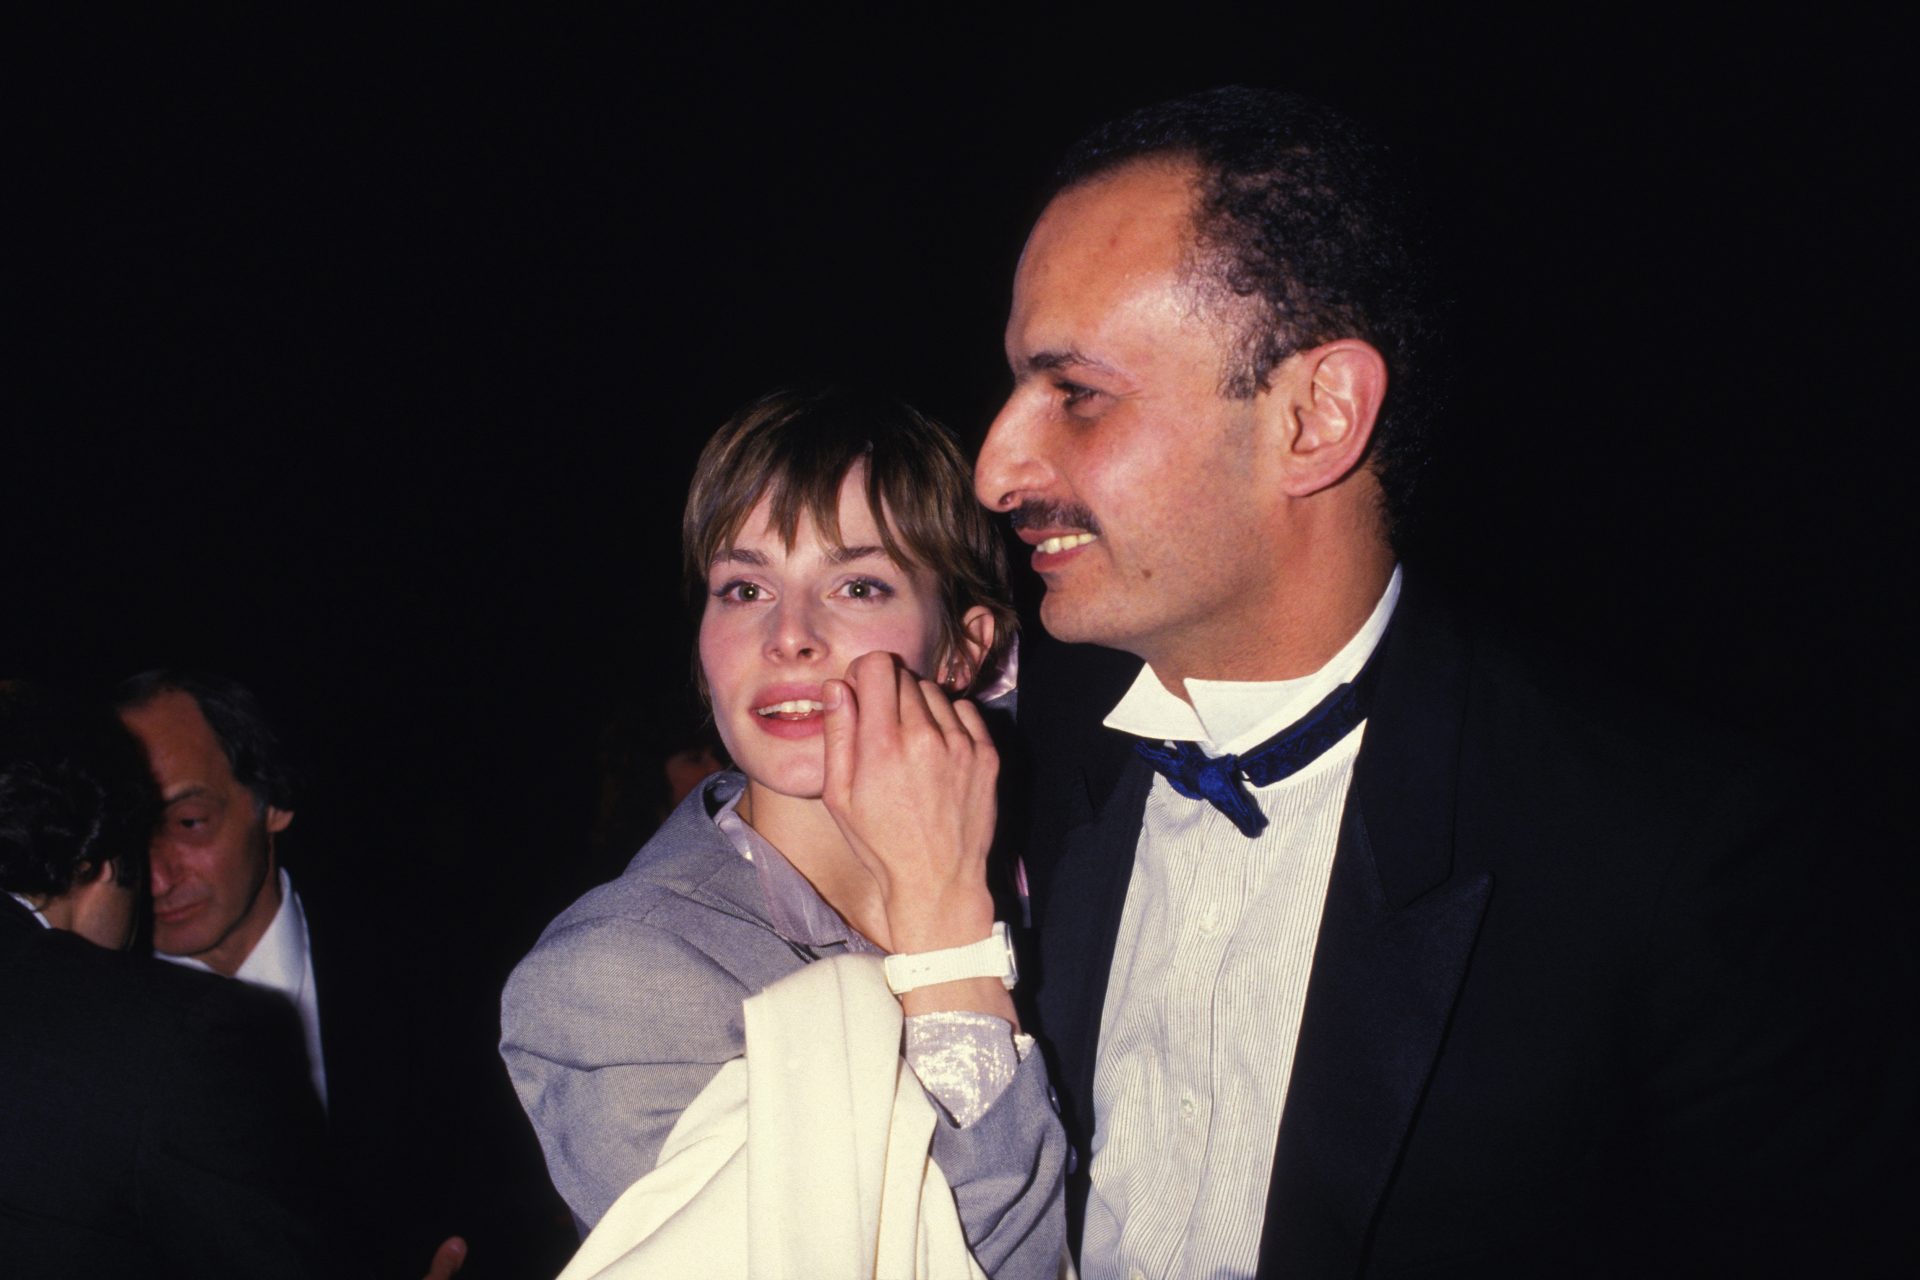 <p>In 1984, she married the Egyptian director Ibrahim Moussa, with whom she had two daughters, Aljosha and Sonja Kinski, both now models.</p>